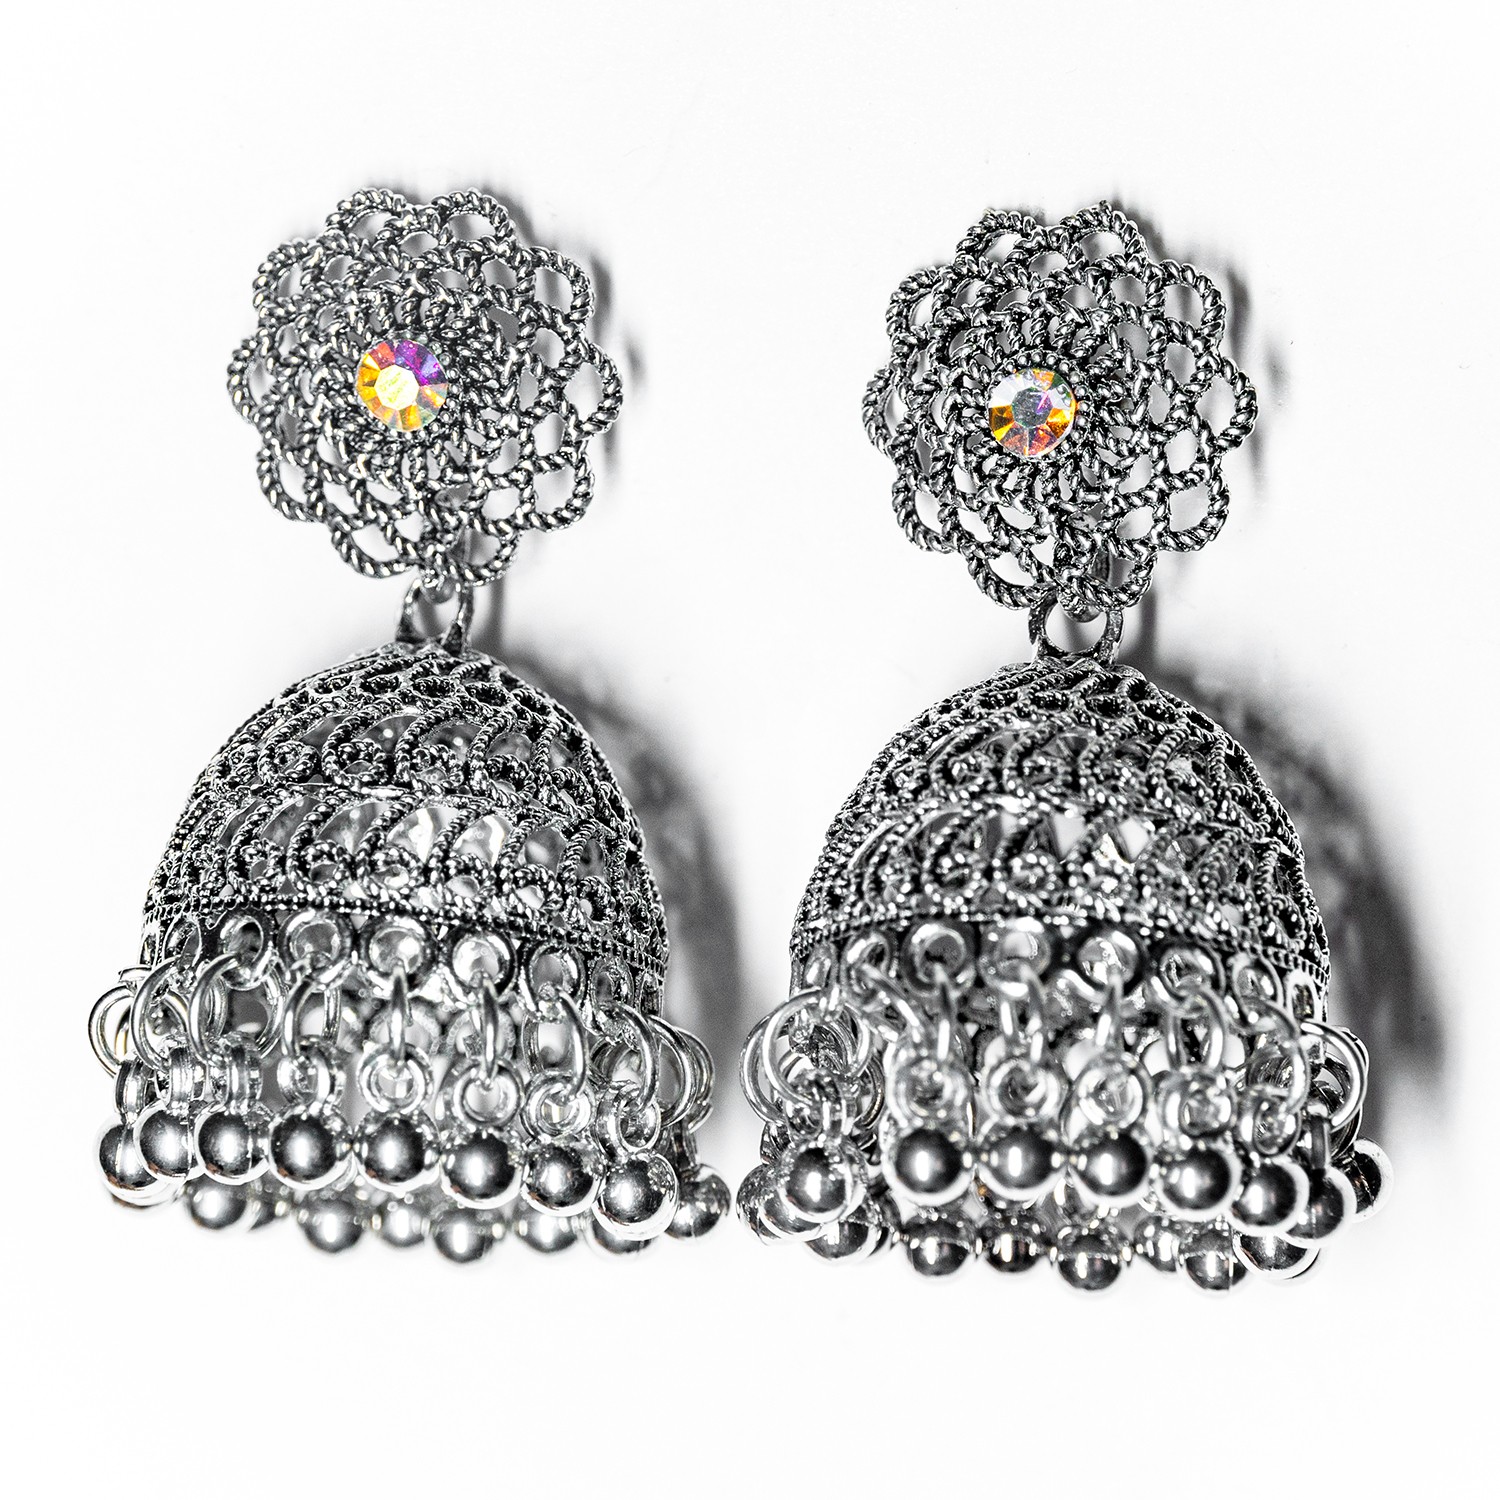 Jumka Earrings for Women - Exquisite Ethnic Elegance for All Occasions"